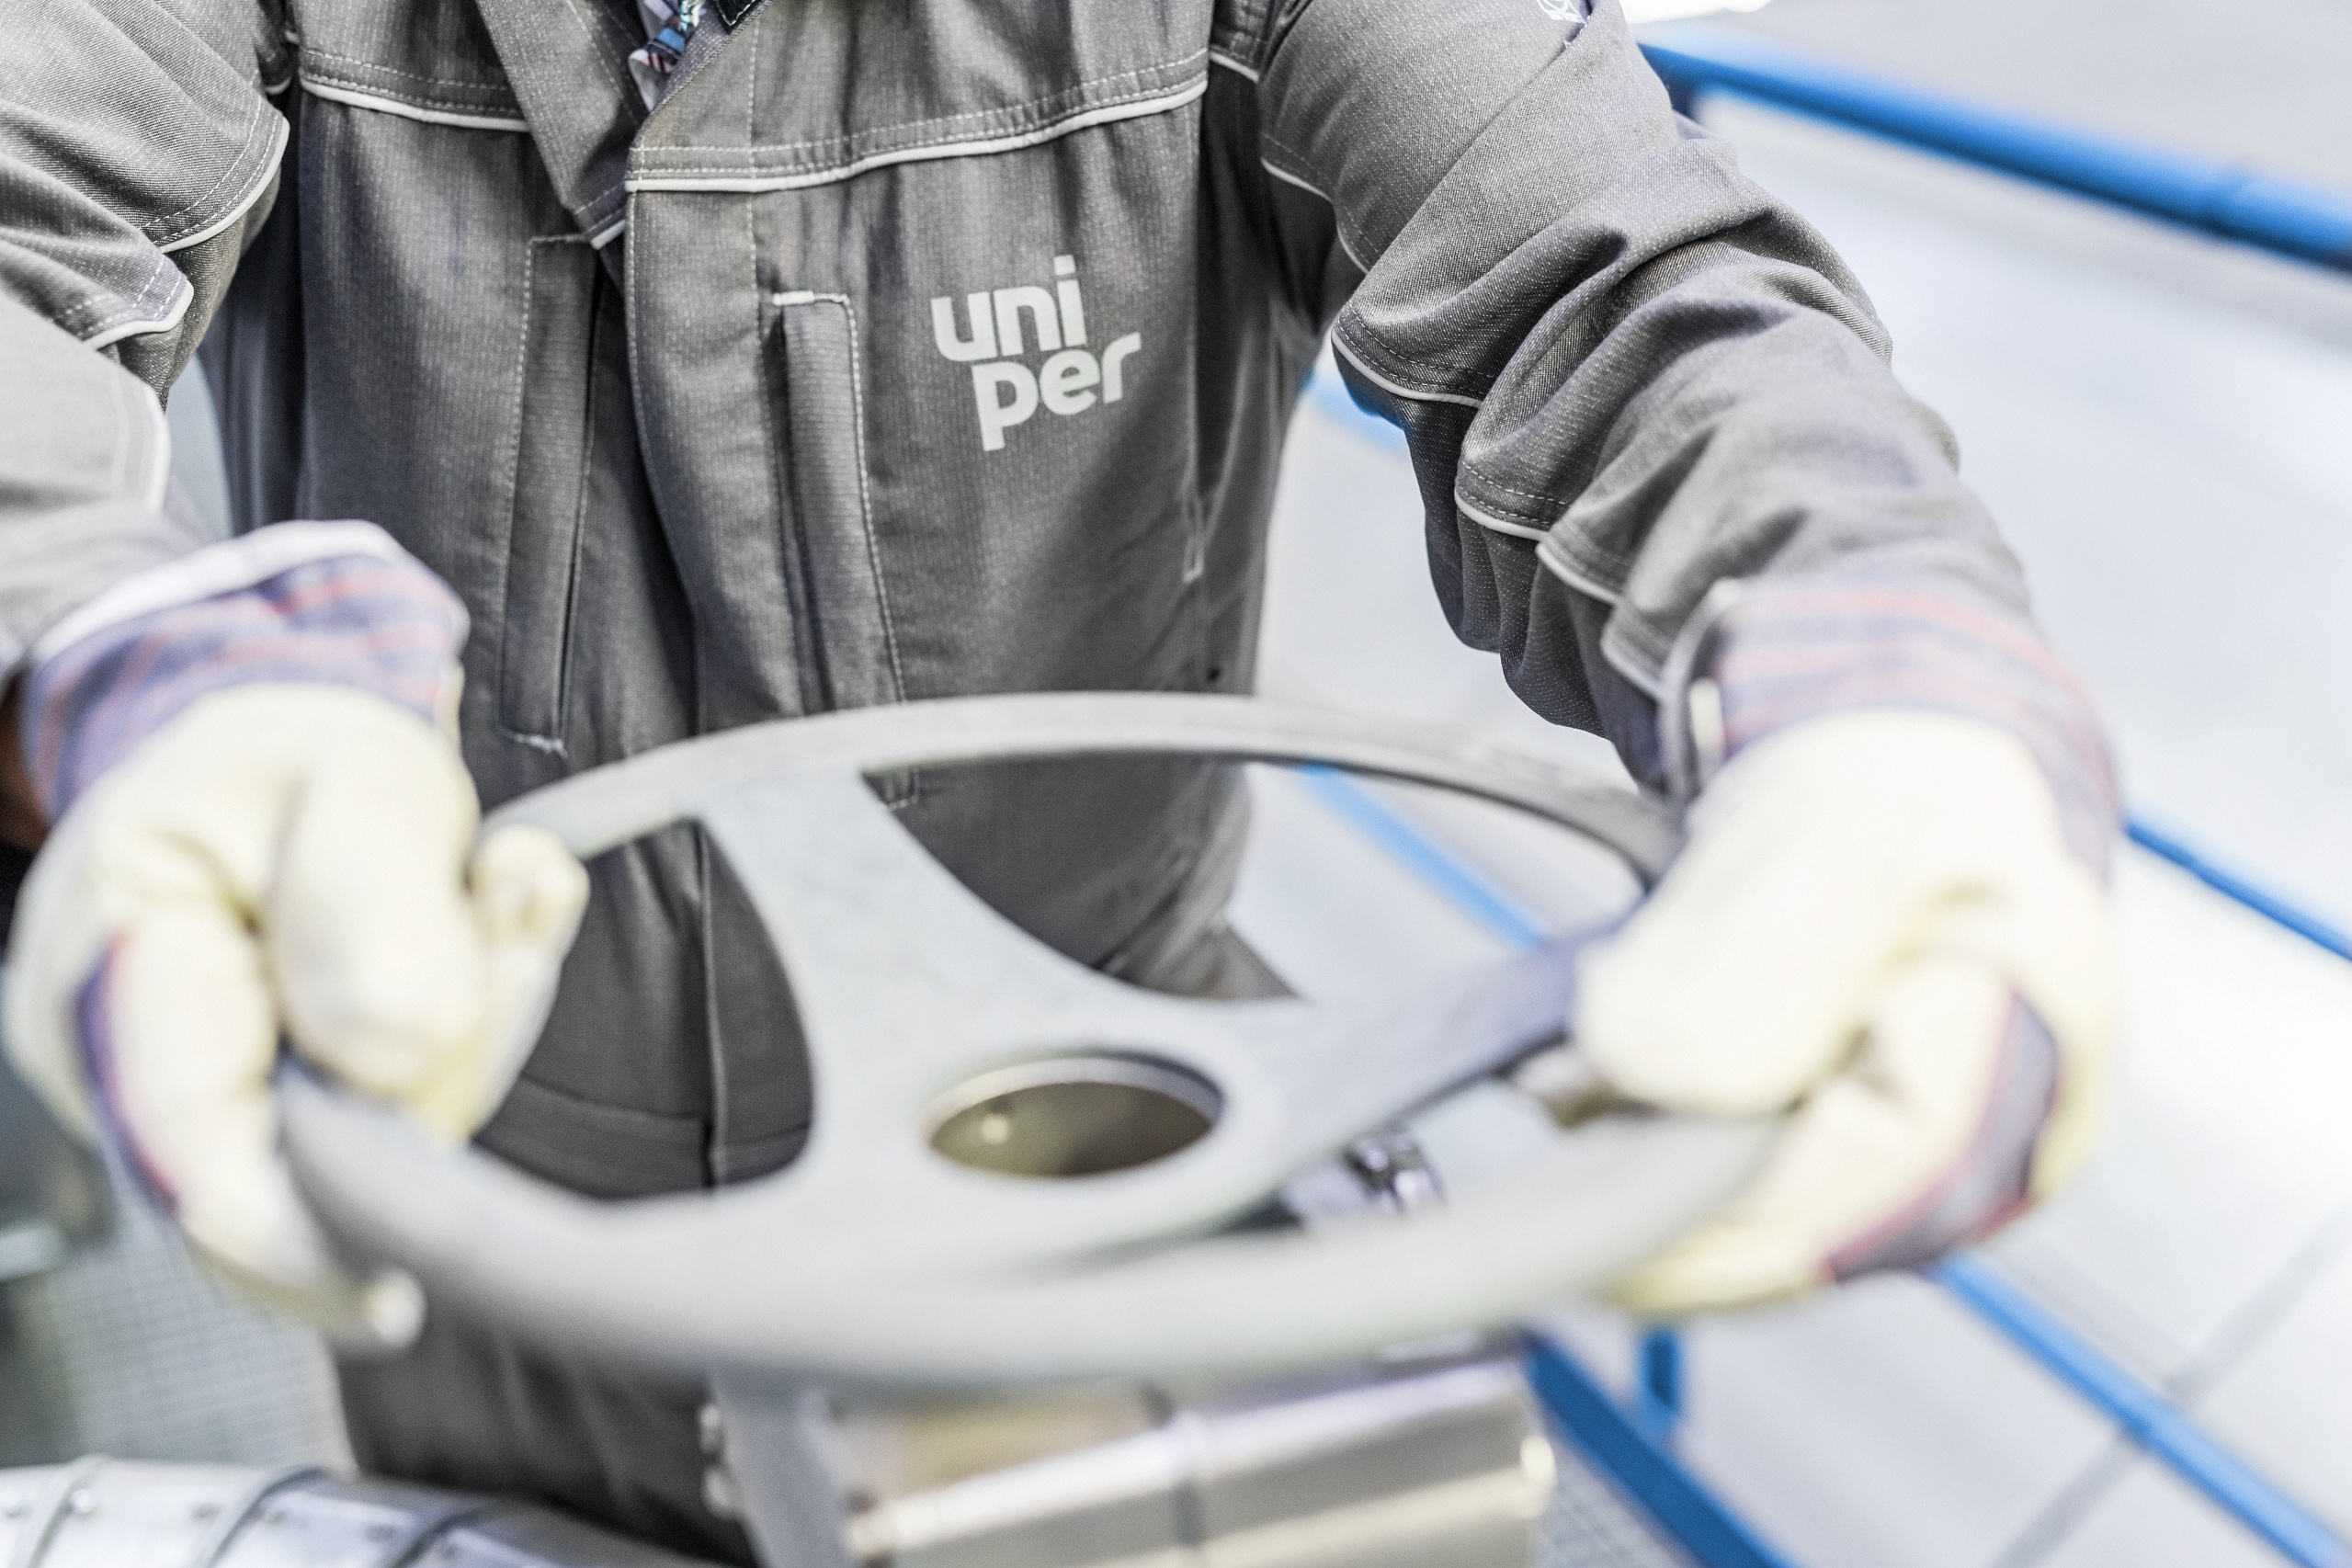 Germany takes full control of Uniper